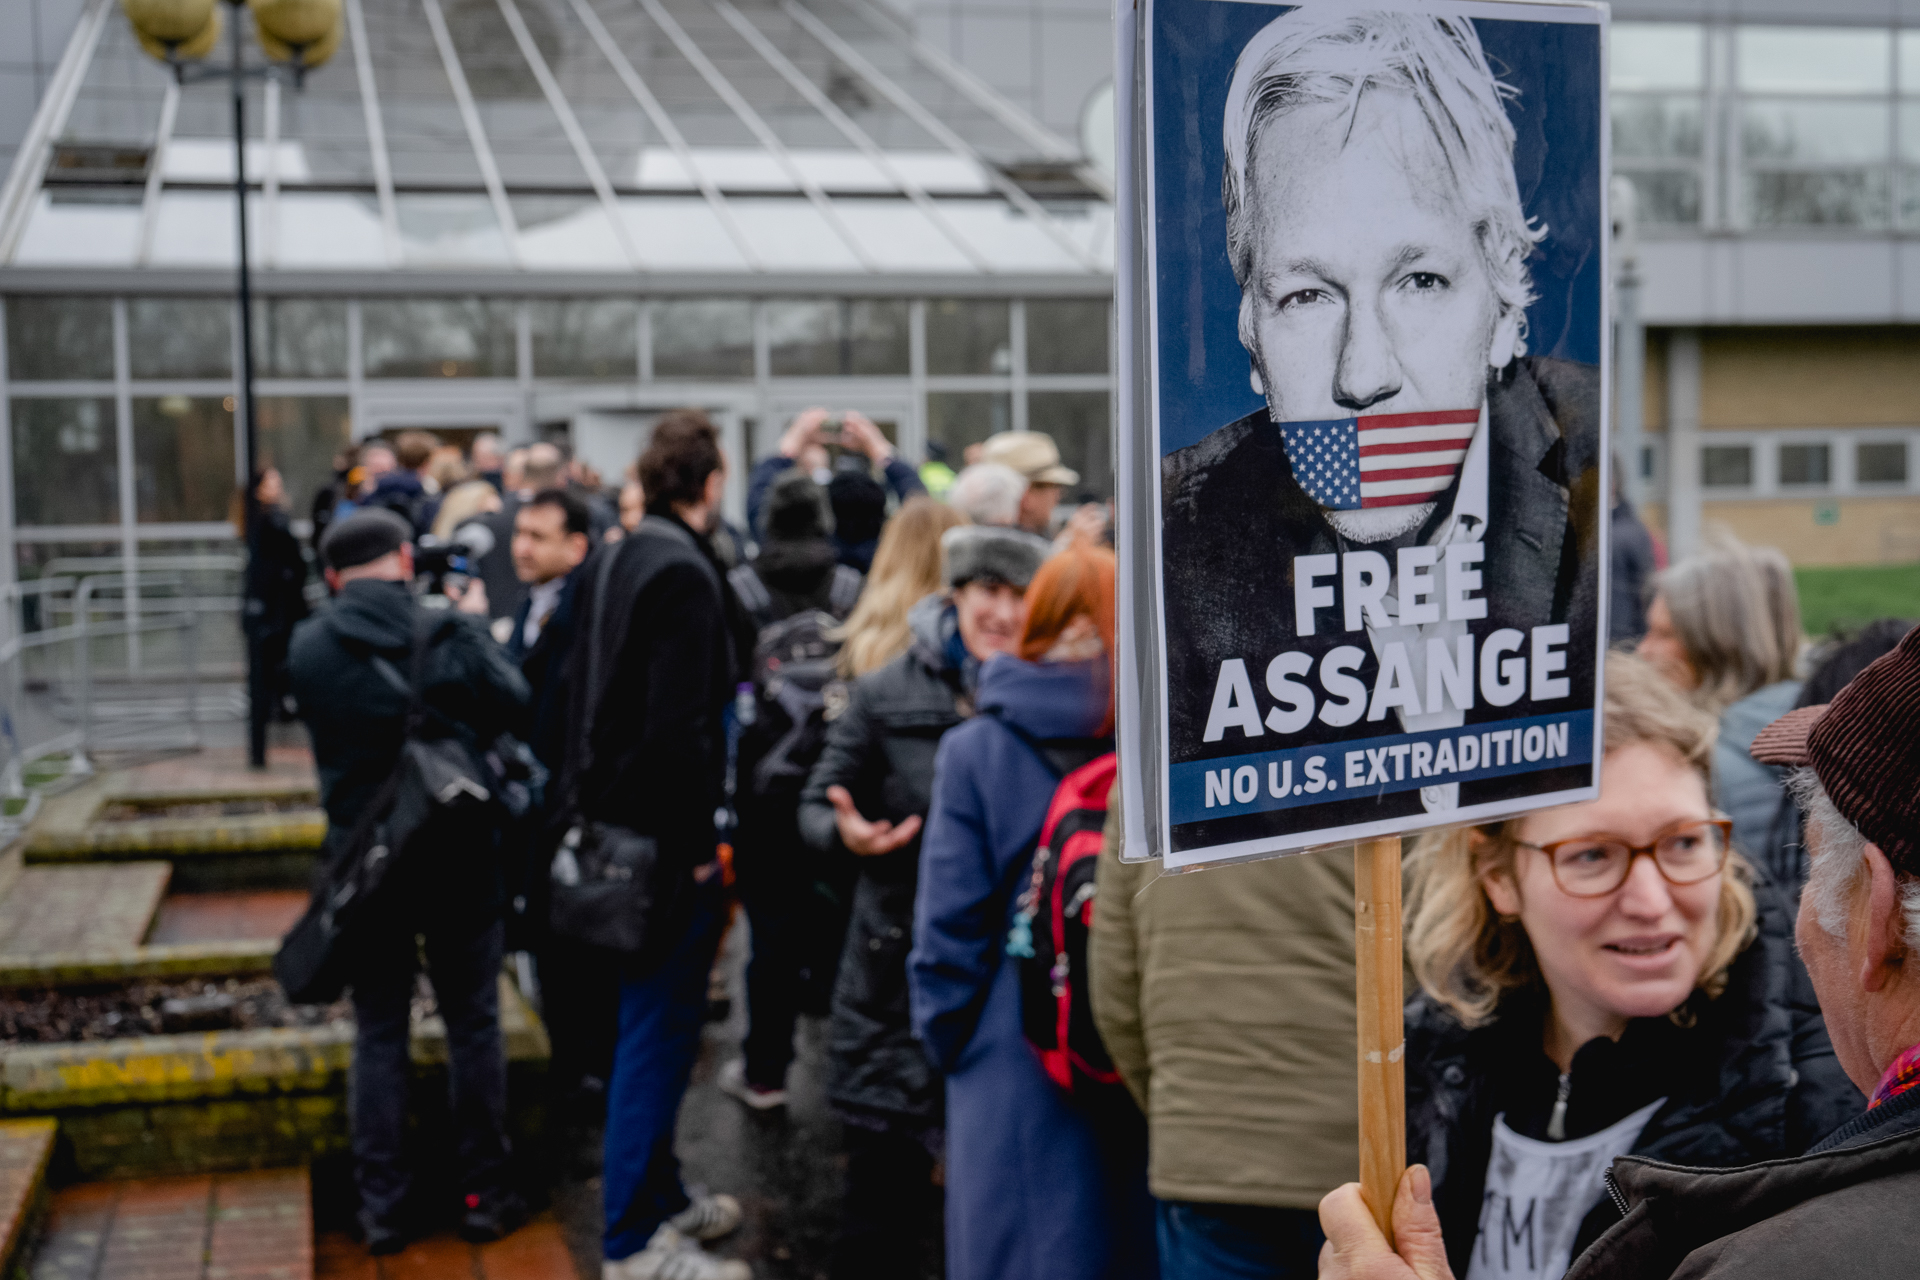 Assange Court Report Day 1: Afternoon